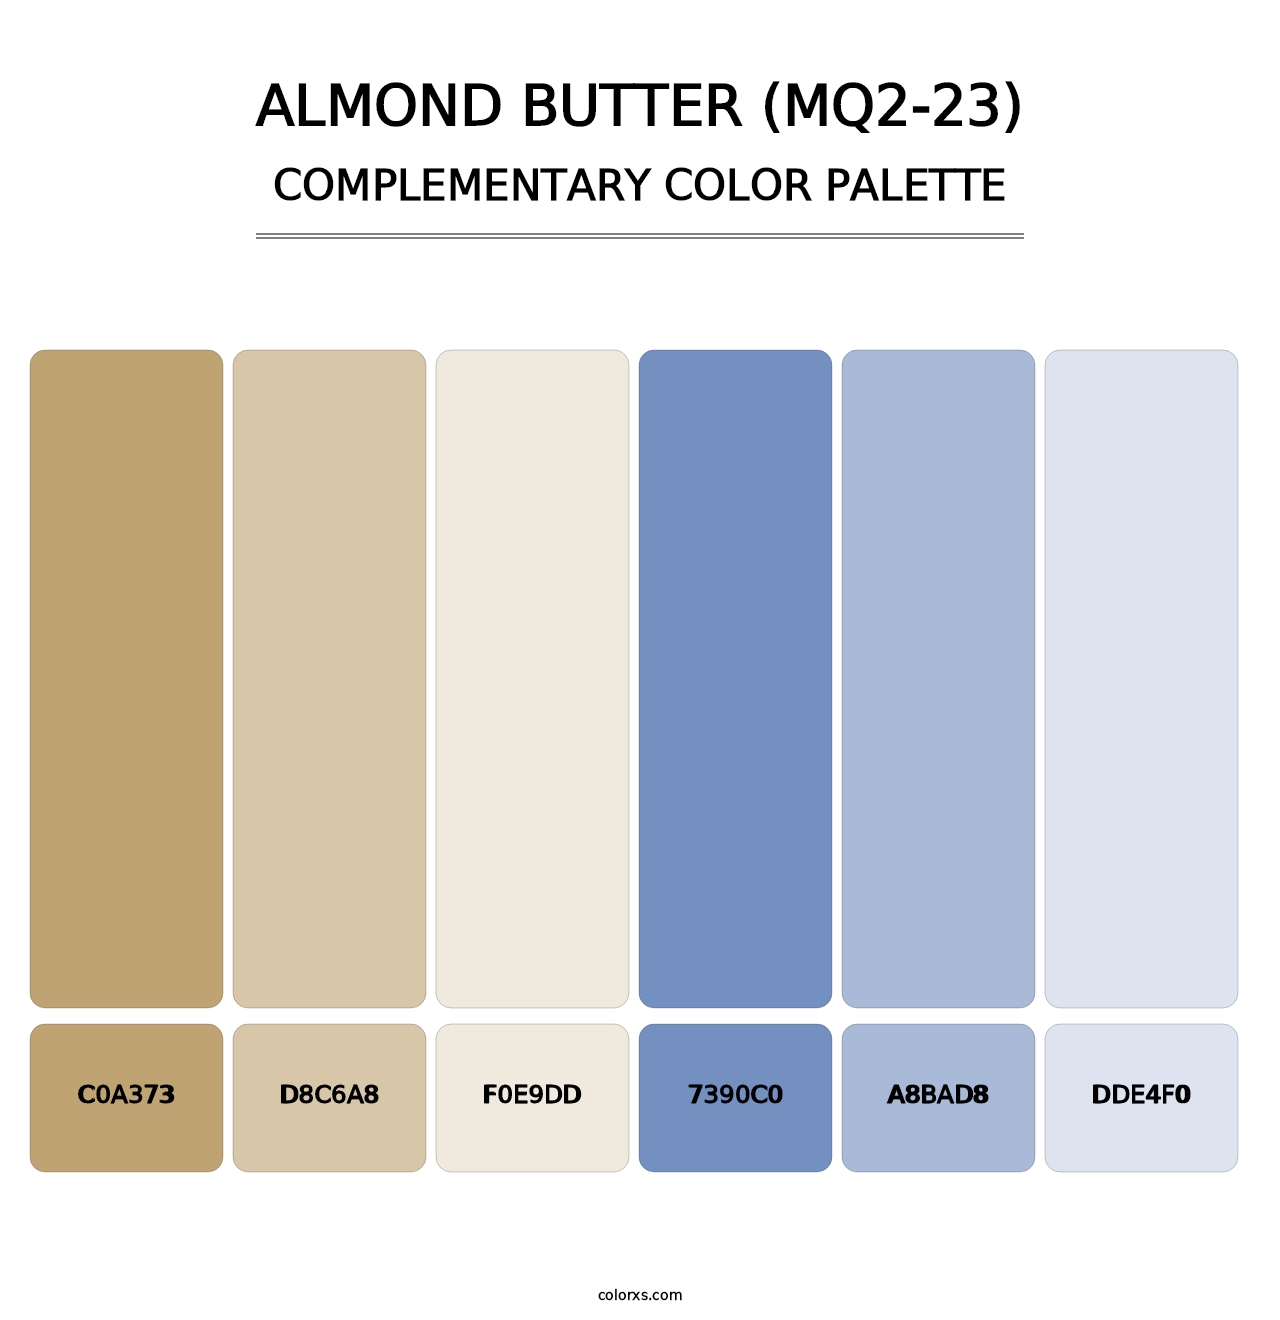 Almond Butter (MQ2-23) - Complementary Color Palette